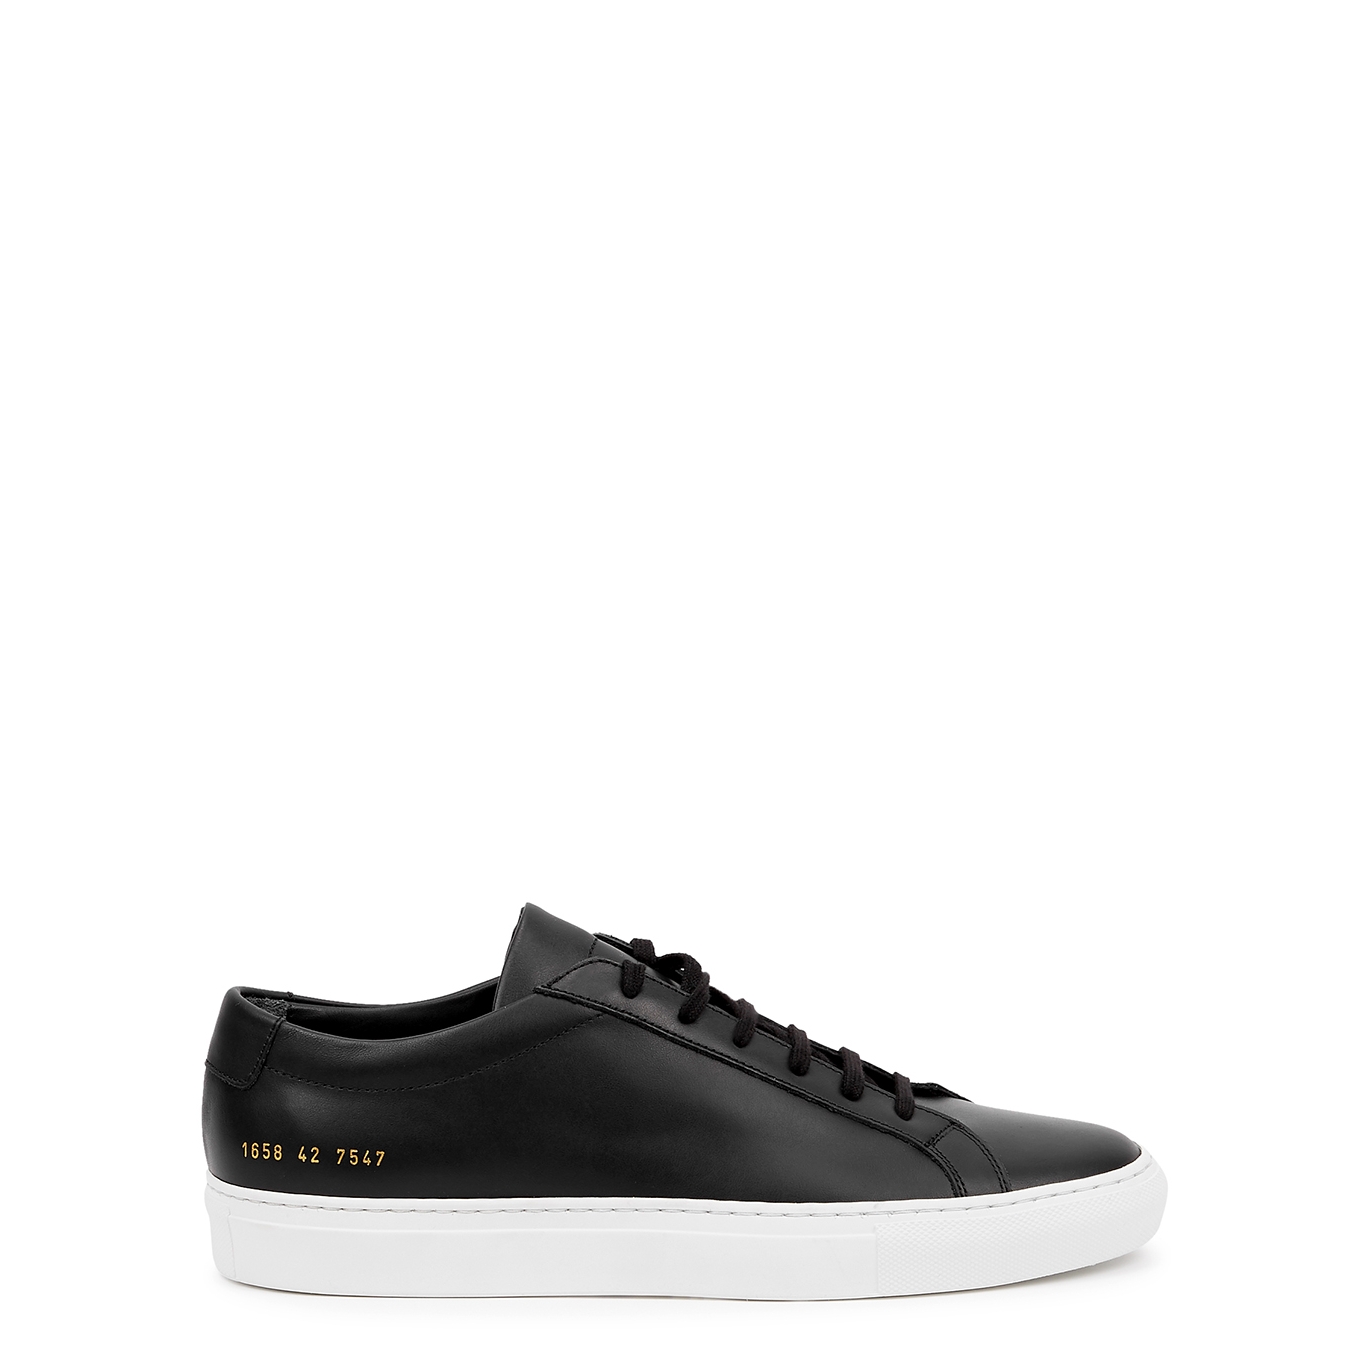 Common Projects Achilles Black Leather Sneakers - Black And White - 5